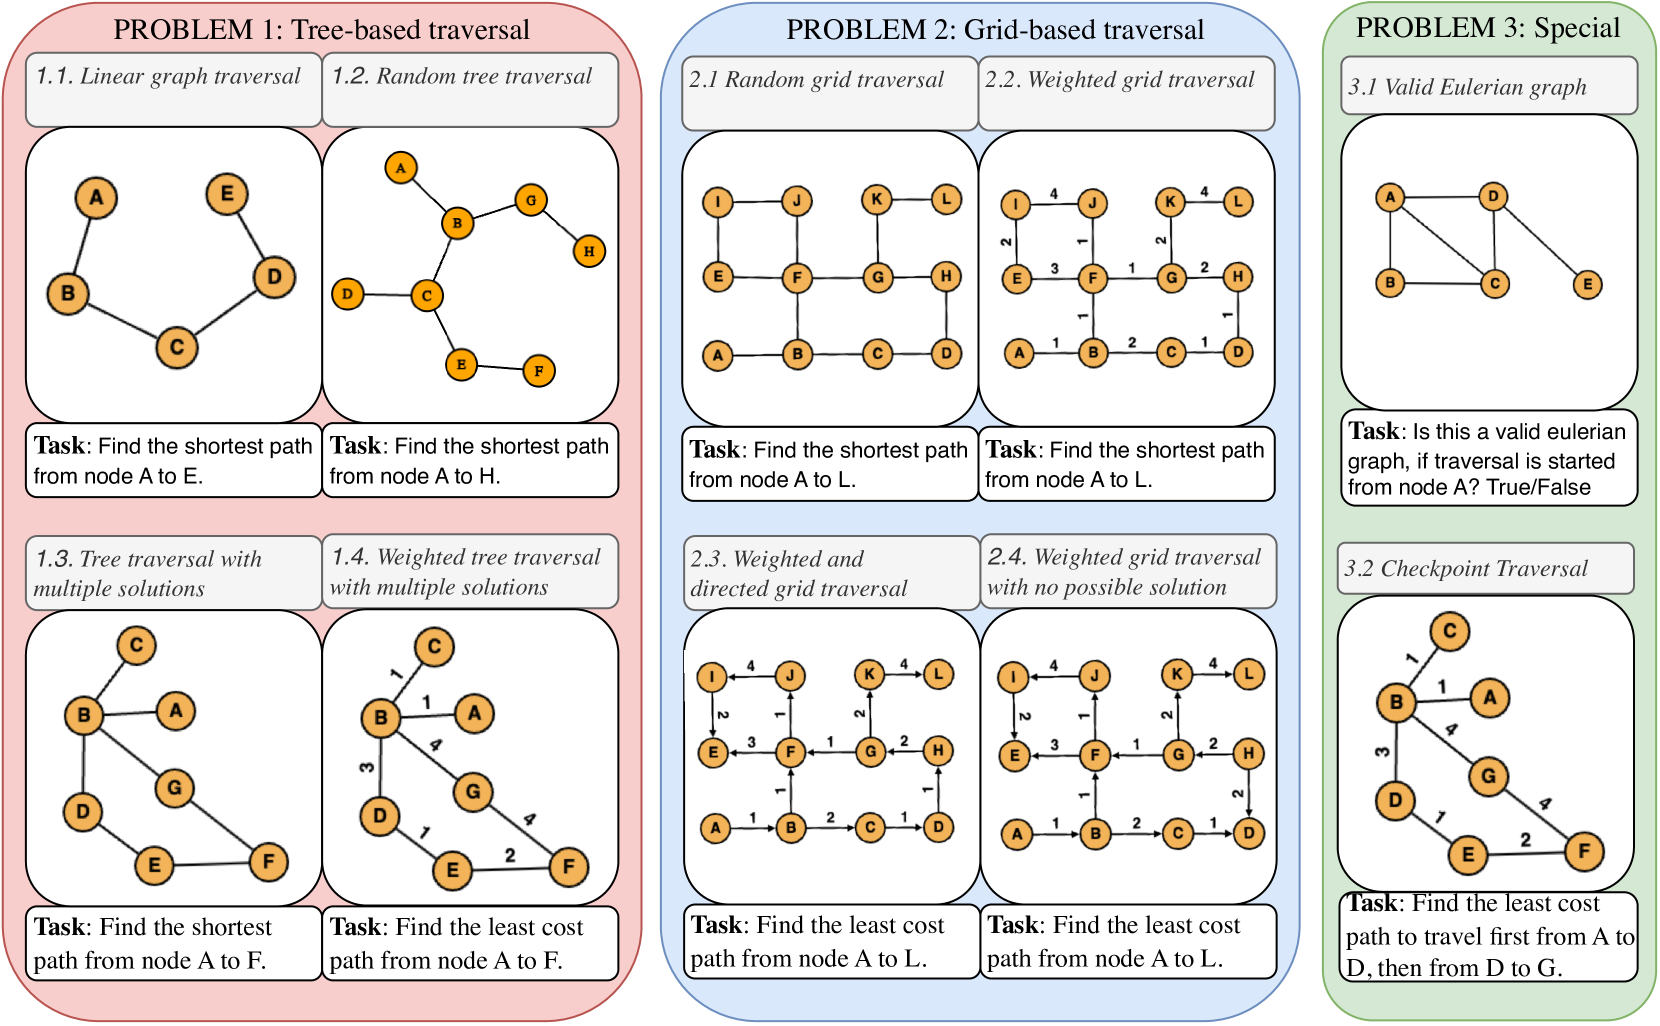 Can LLMs perform structured graph reasoning?